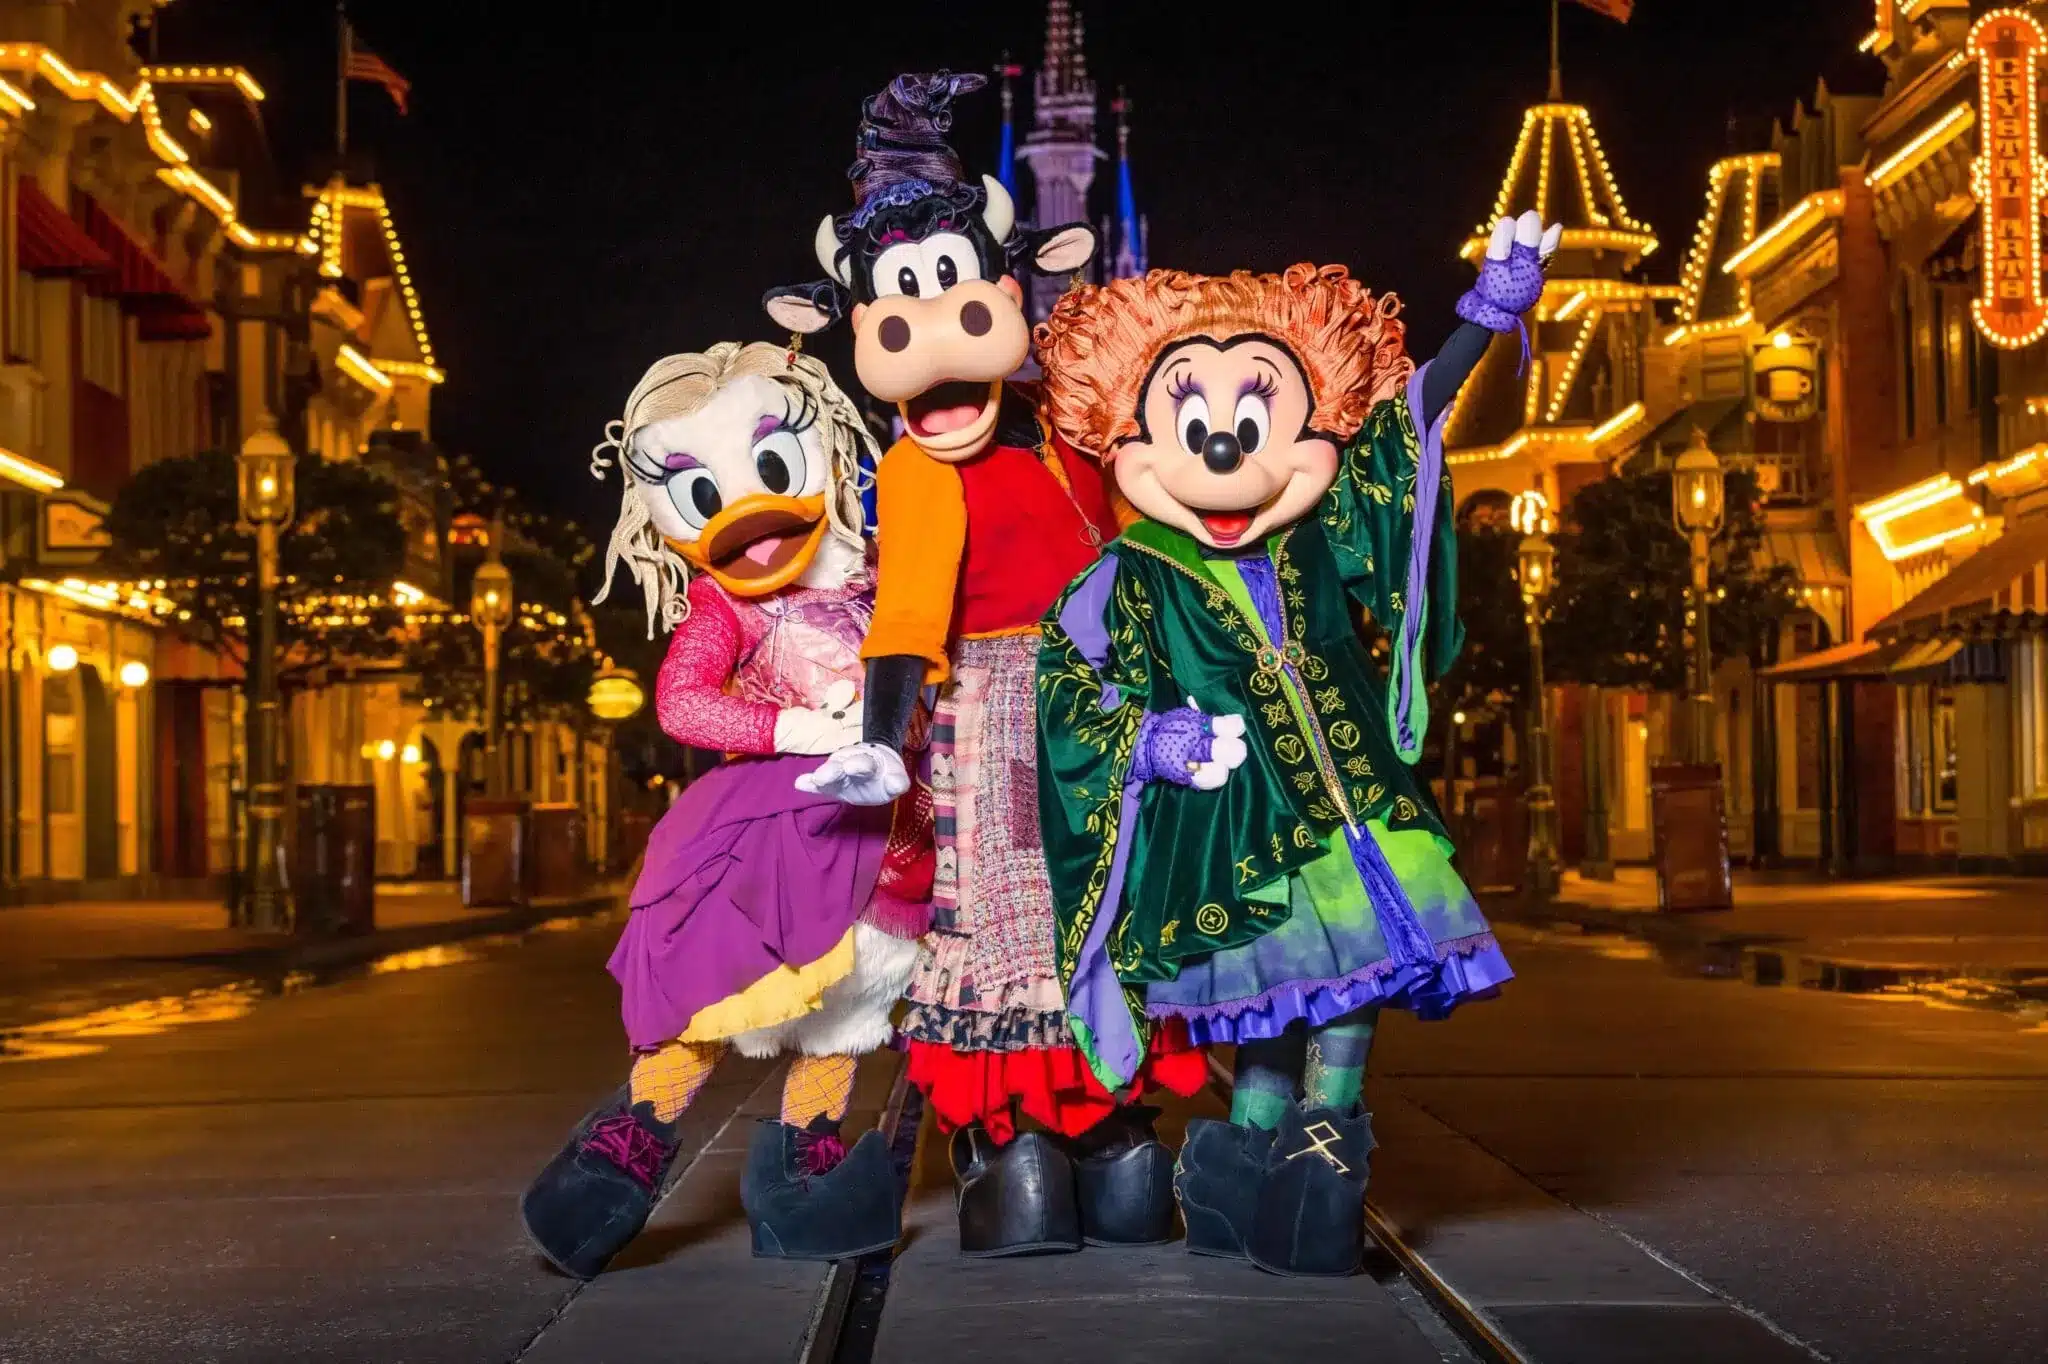 Minnie, Daisy, Clarabelle Cow as the Sanderson Sisters in the Boo To You Parade